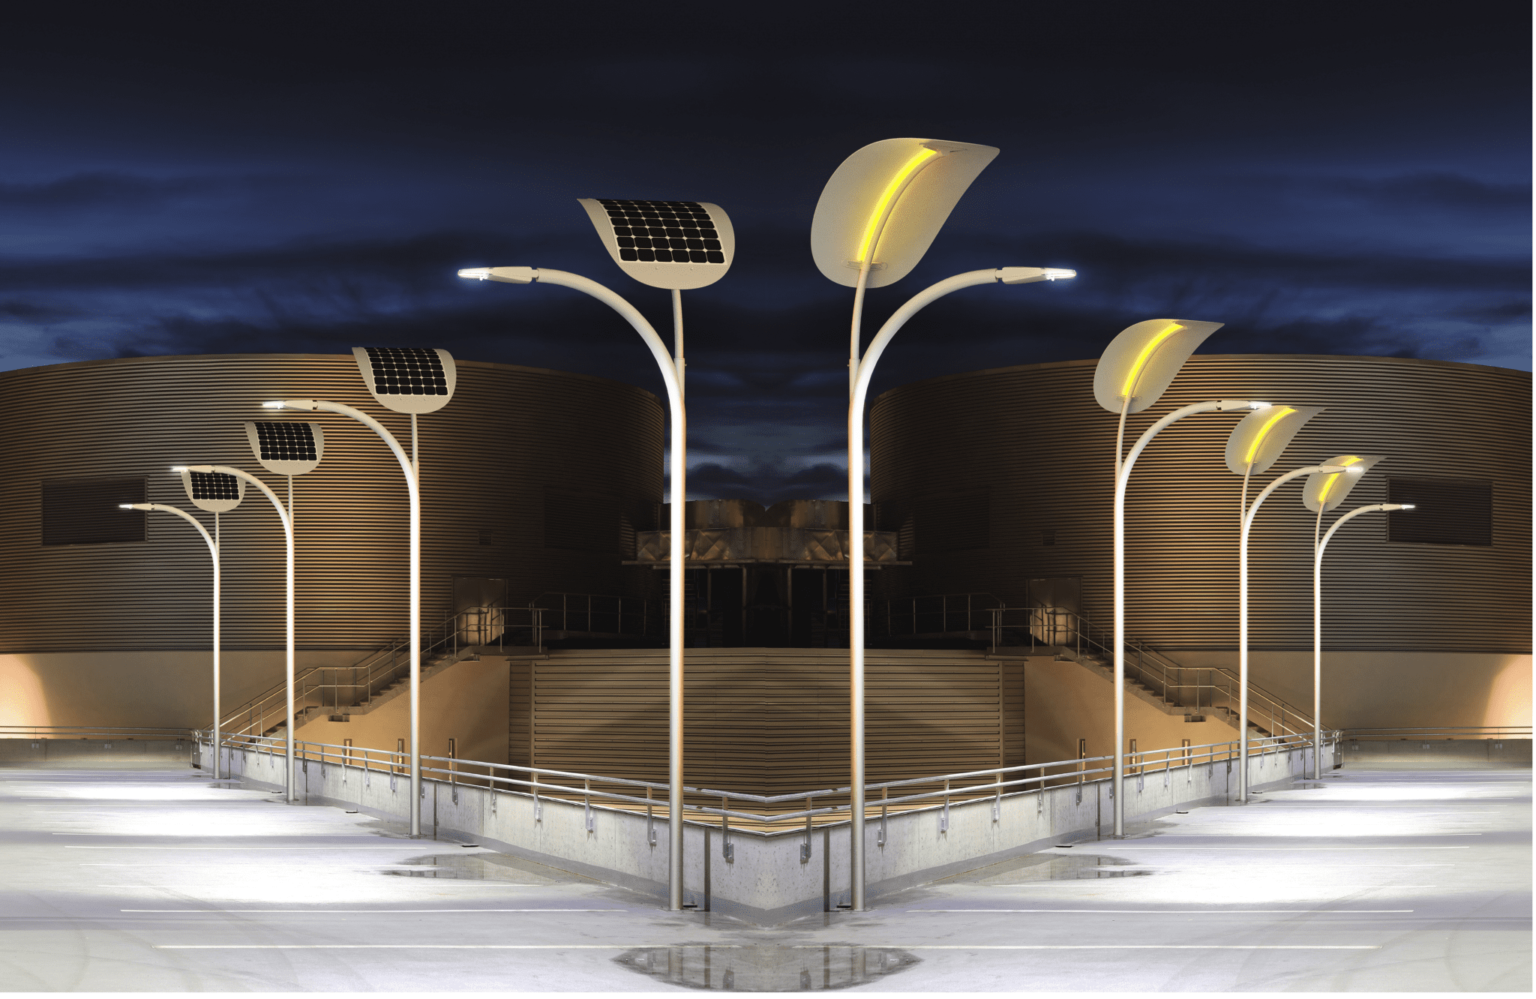 Smart Street Lighting Market Market Segment and Industry Growth Forecast by 2031